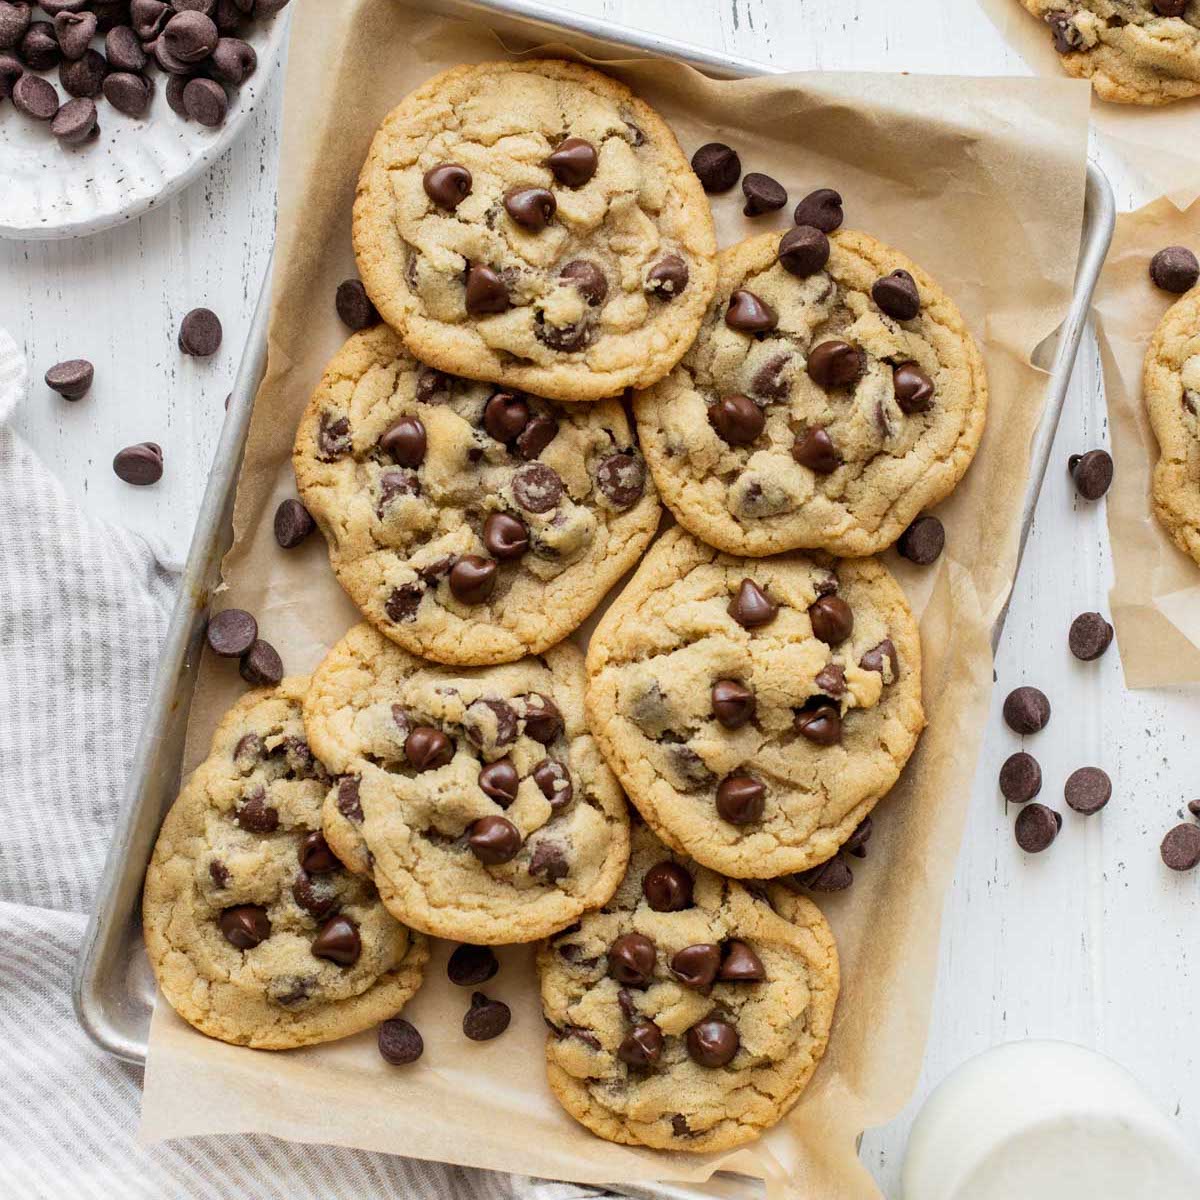 how to make chocolate chip cookies step by step pictures